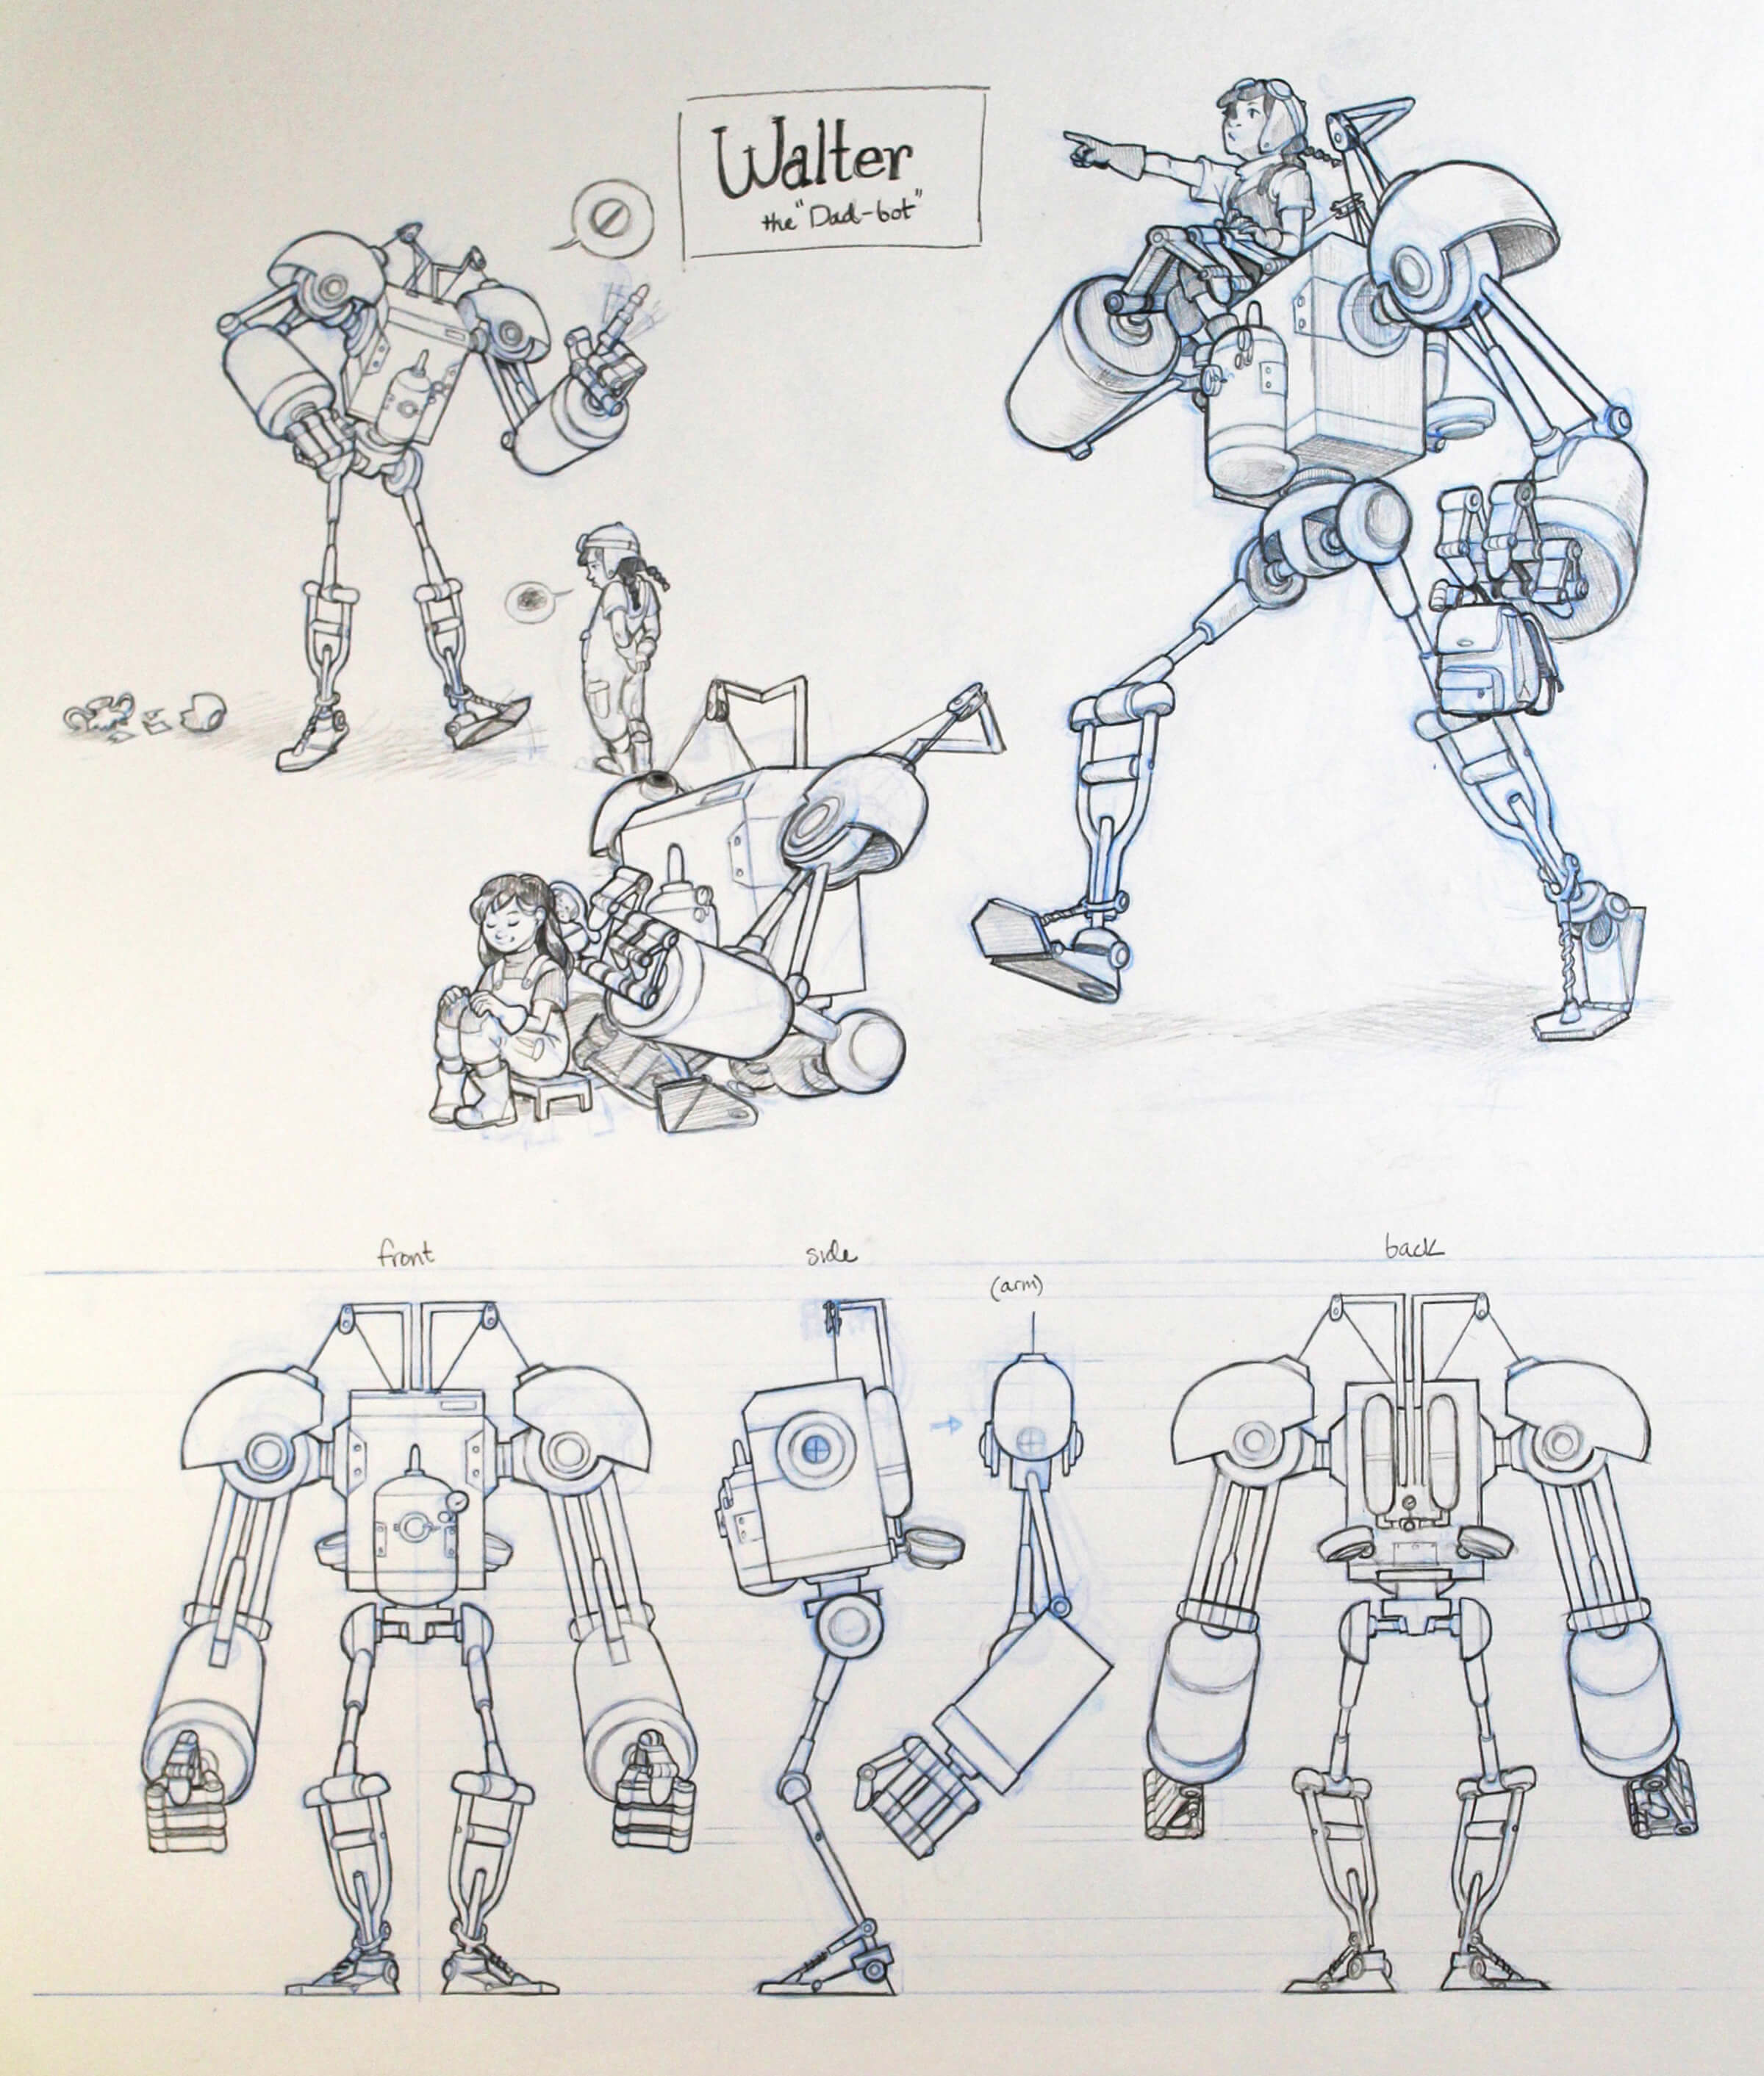 black and white drawings of a robot character named walter, one of which shows him carrying a girl on his shoulder